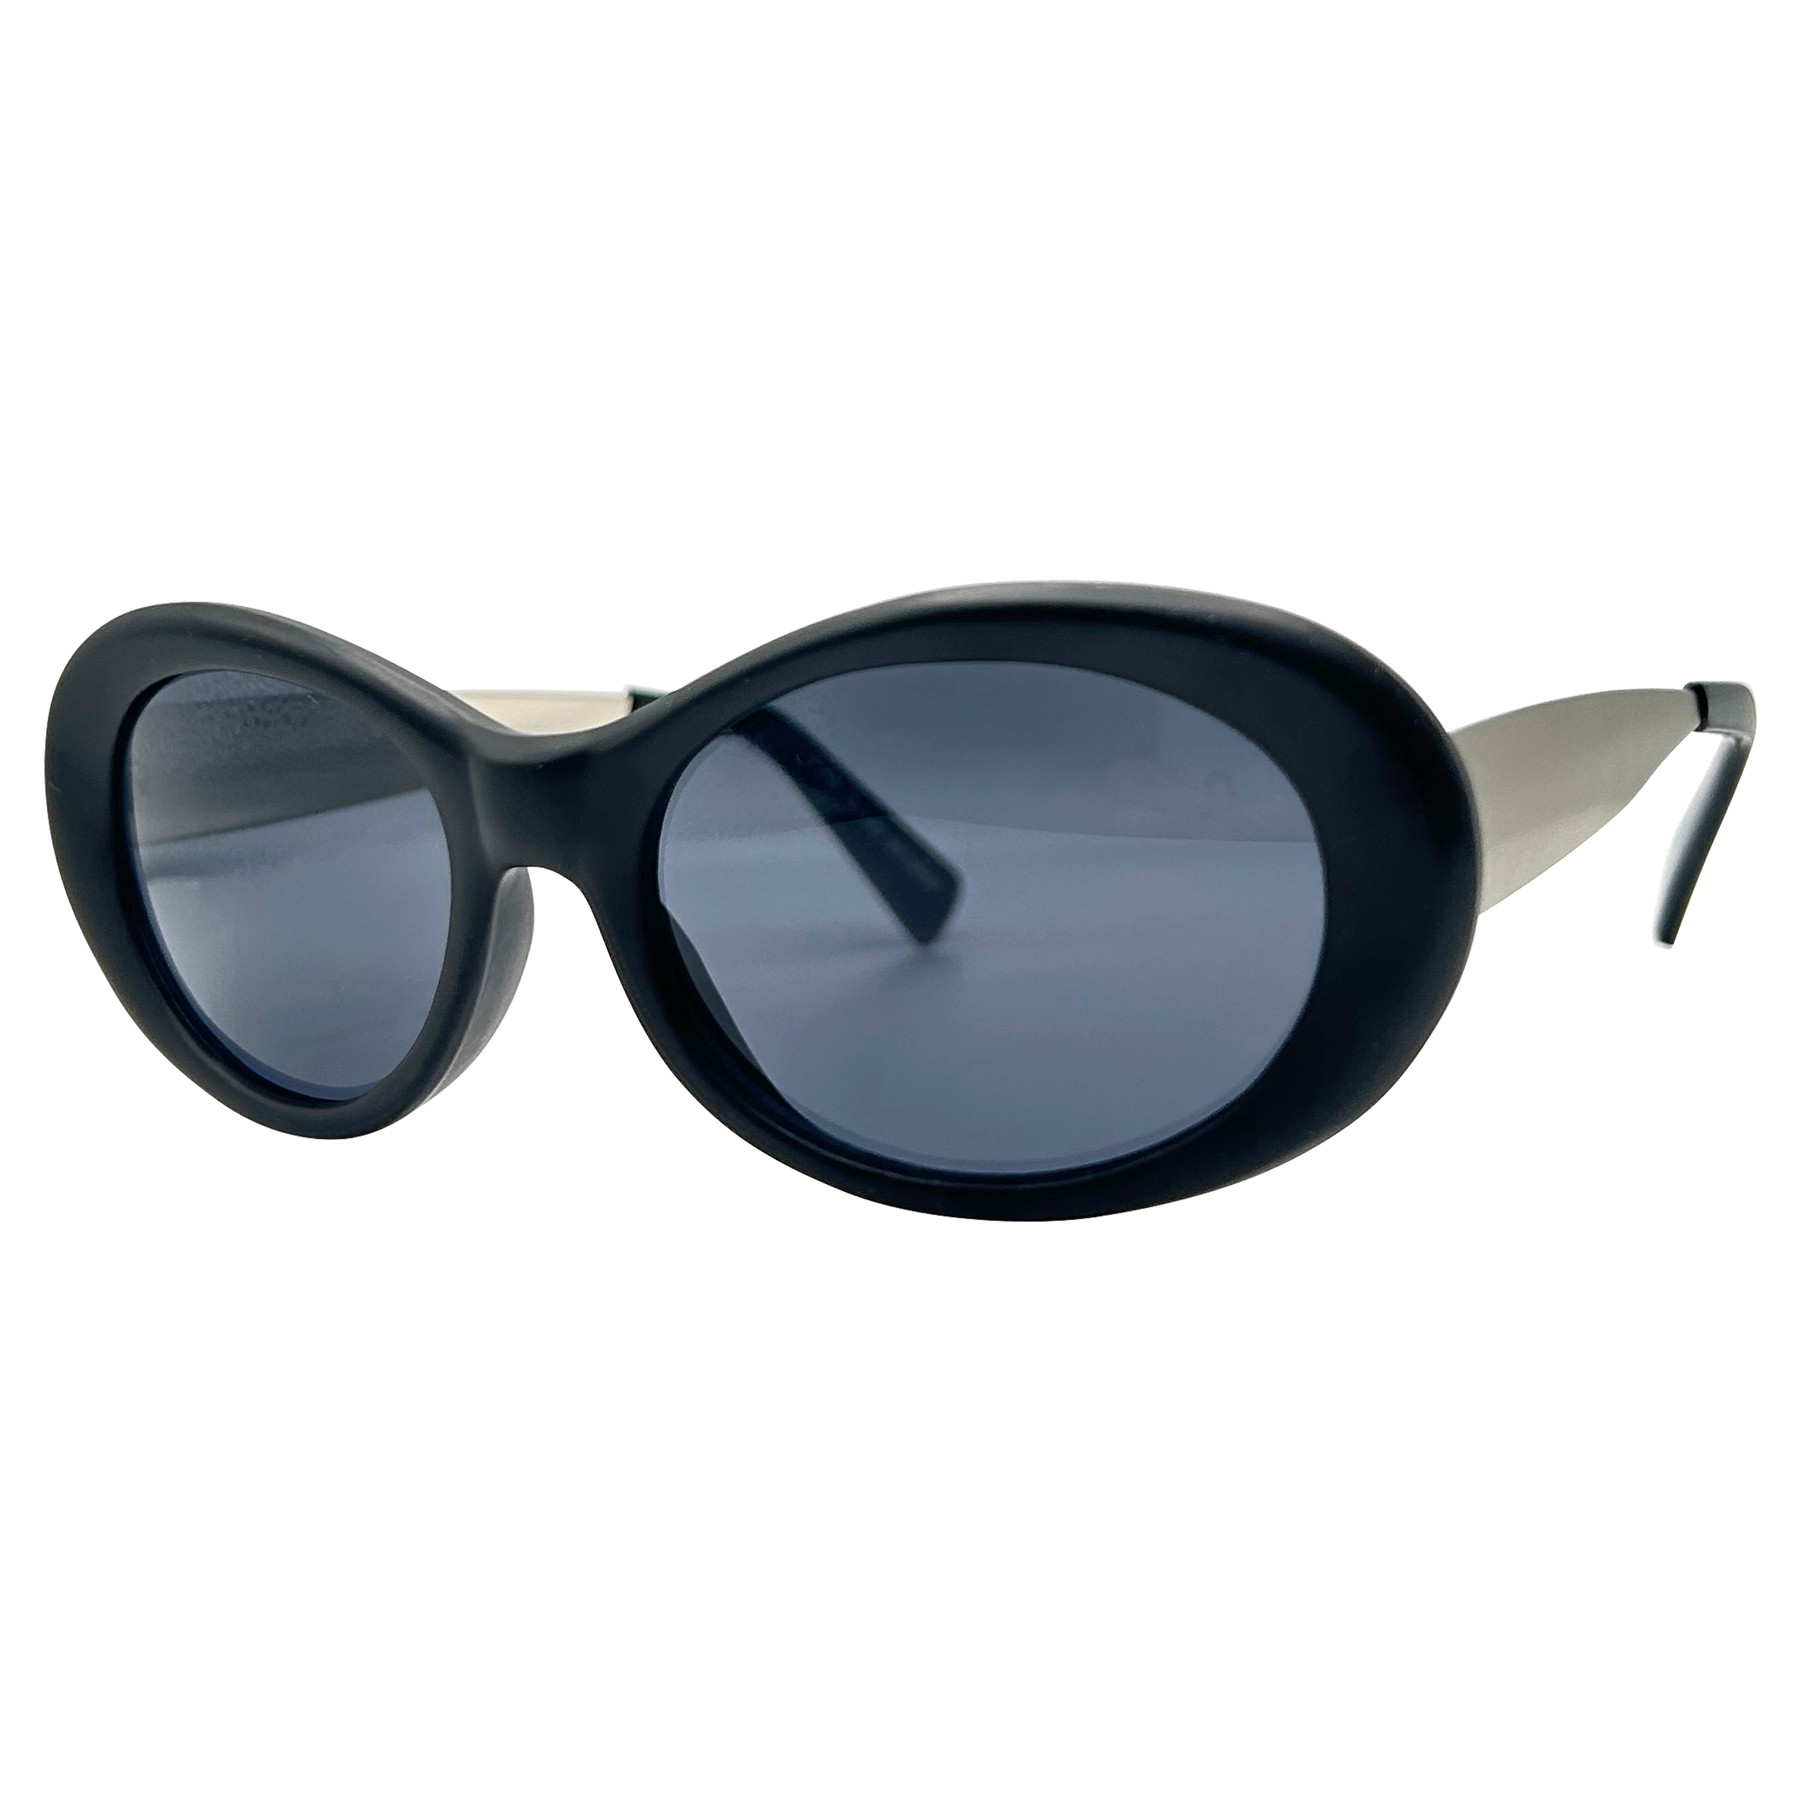 YOUTH Black/Silver Oval Sunglasses